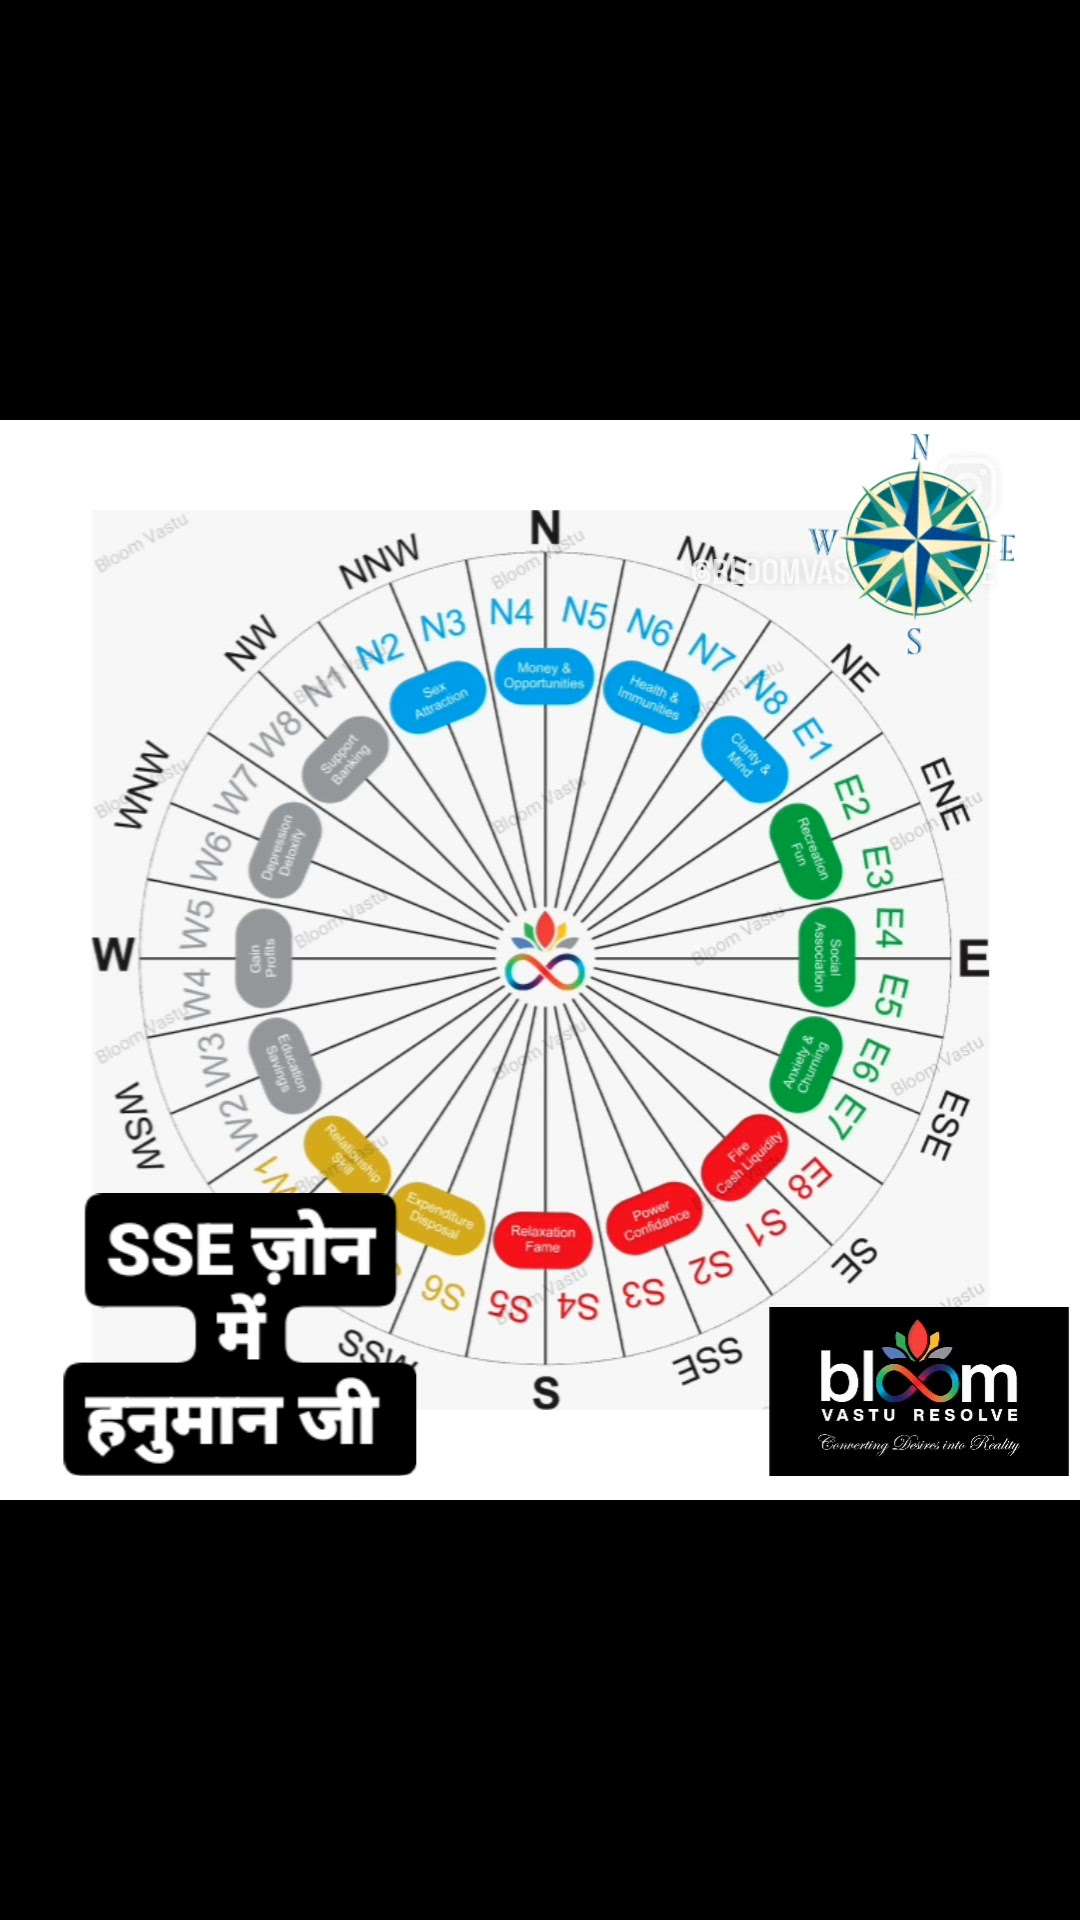 गुरुसखा की वाणी 🎤:   Zone of power and confidence ?
 comments are always welcome.
For more Vastu please follow @bloomvasturesolve
on YouTube, Instagram & Facebook
.
.
For personal consultation, feel free to contact certified MahaVastu Expert through
M - 9826592271
Or
bloomvasturesolve@gmail.com

#vastu #वास्तु #mahavastu #mahavastuexpert #bloomvasturesolve #vastuforhome #vastureels #vastulogy #vastuexpert #advancevastu #vasturemedy #ssezone #vastuforconfidence #hanumanji  #officevastu